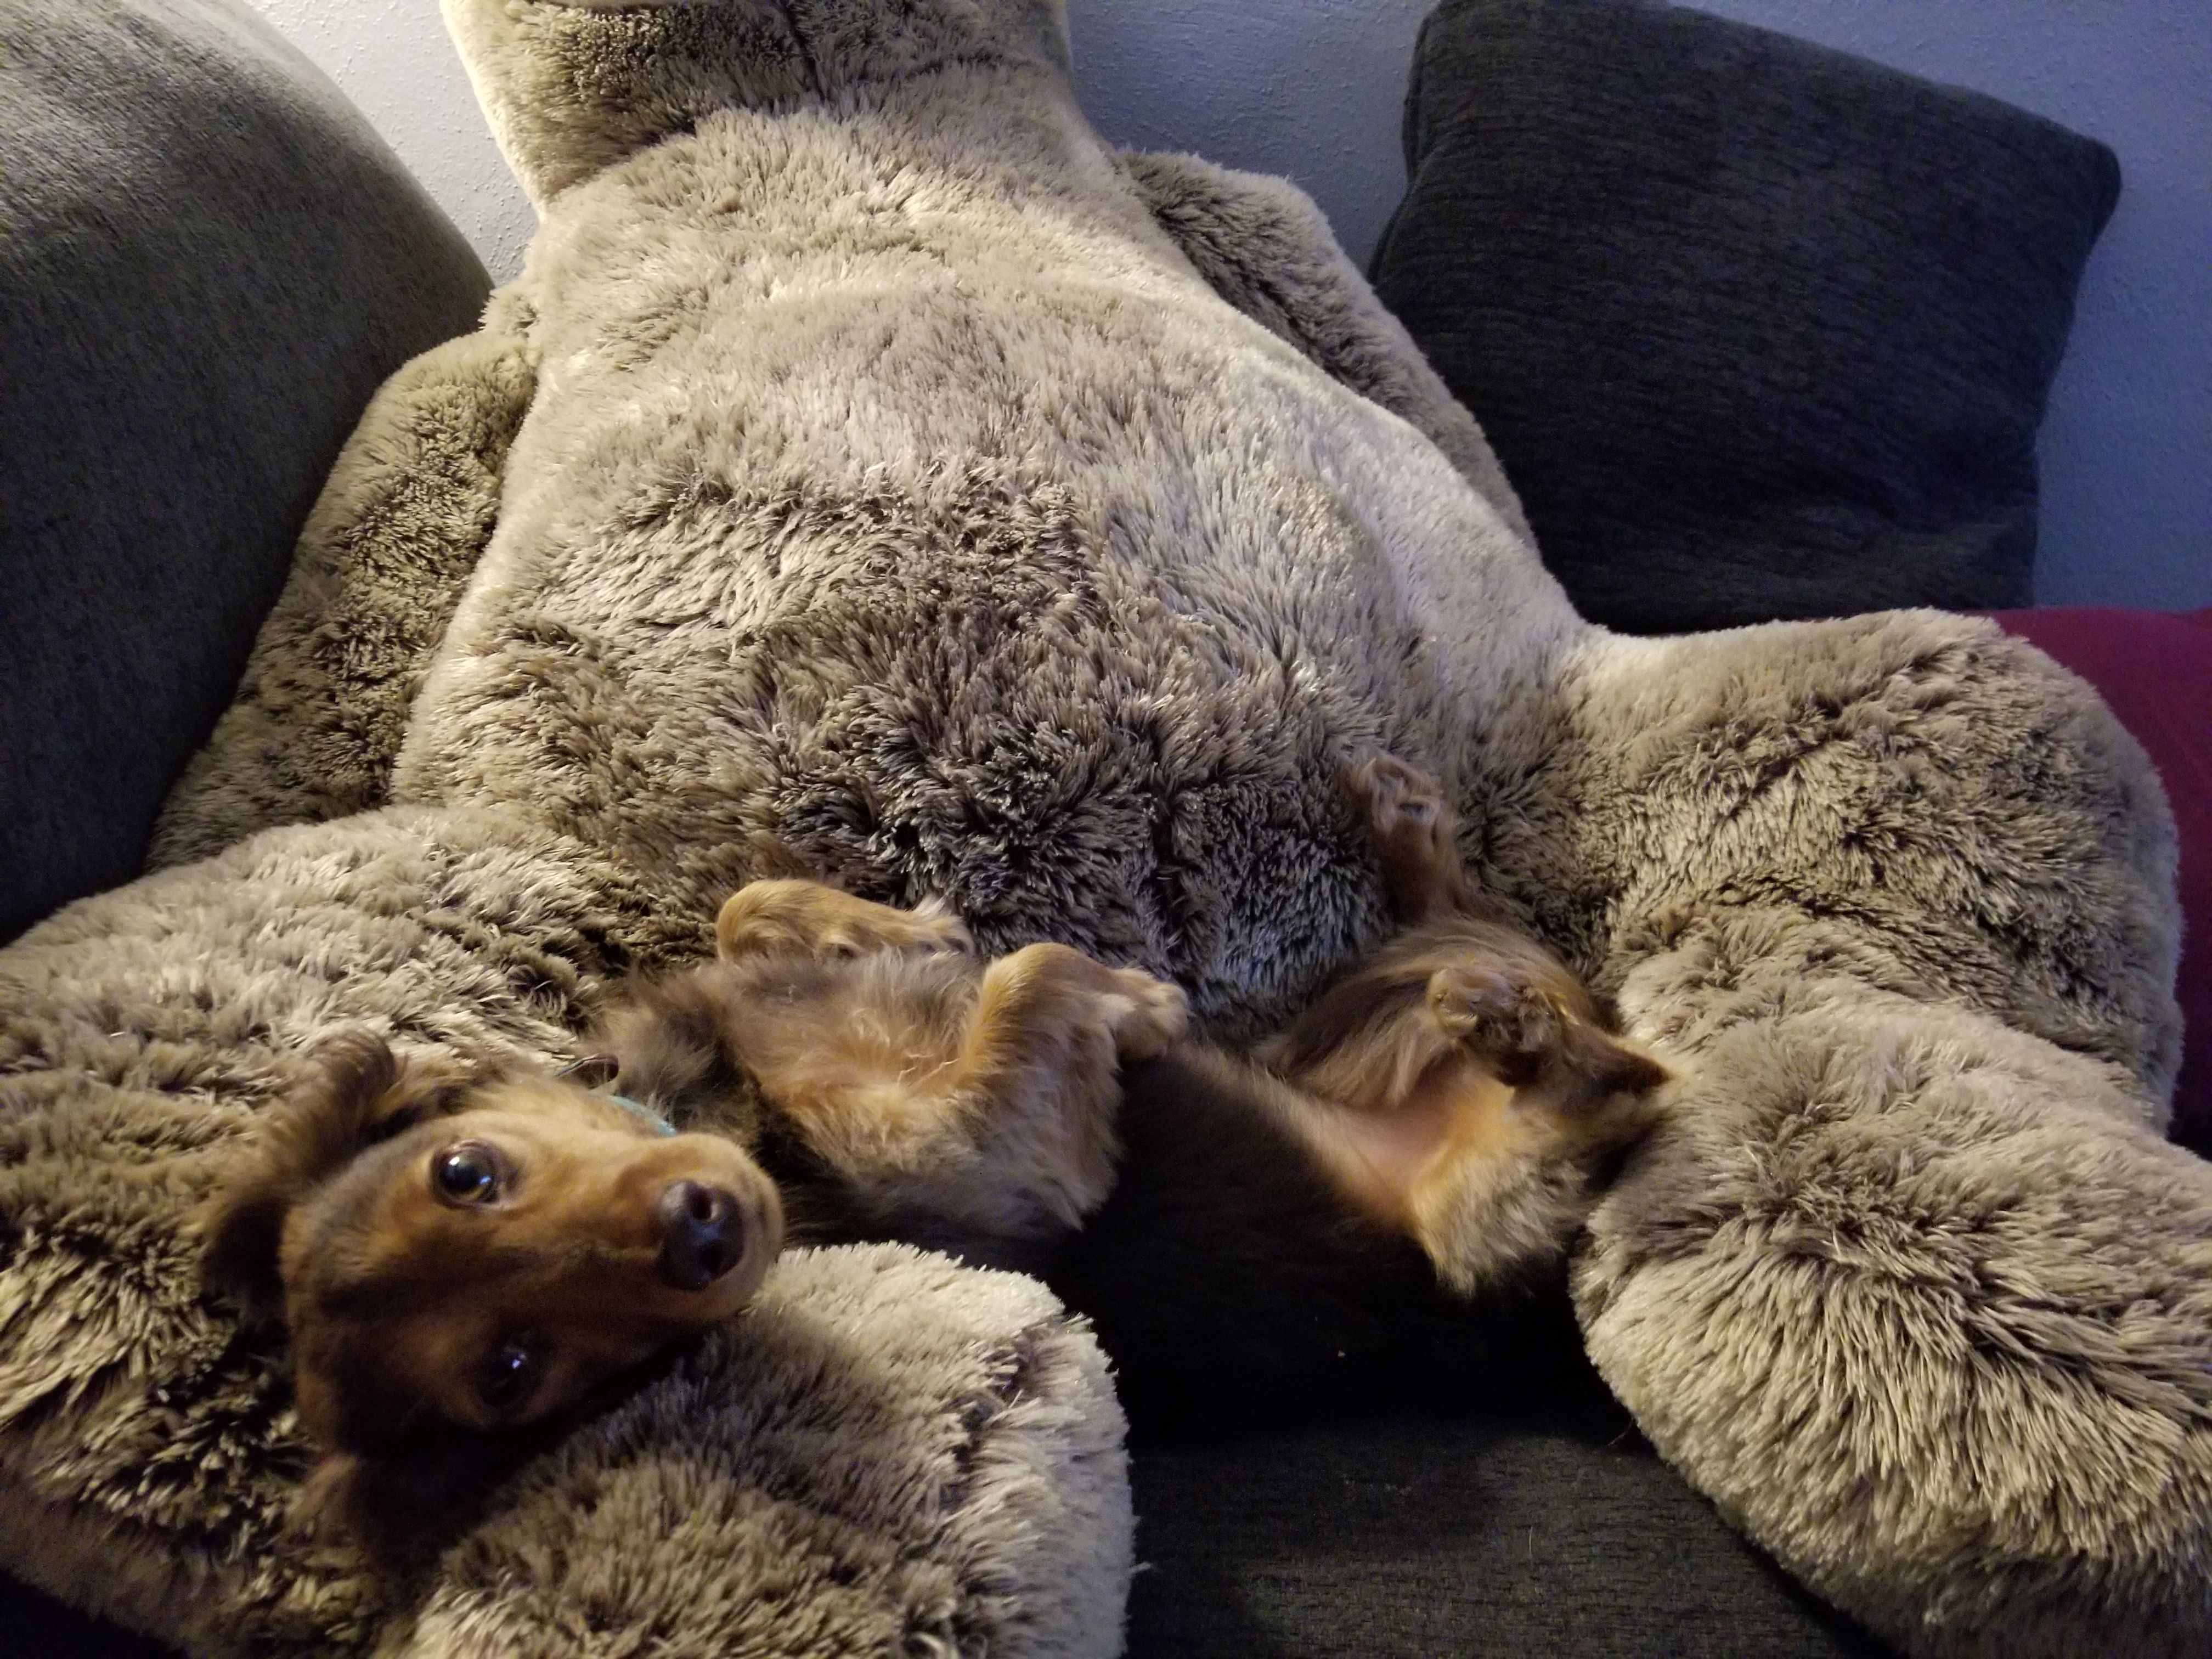 My derpy sausage cuddling with a giant stuffed sloth